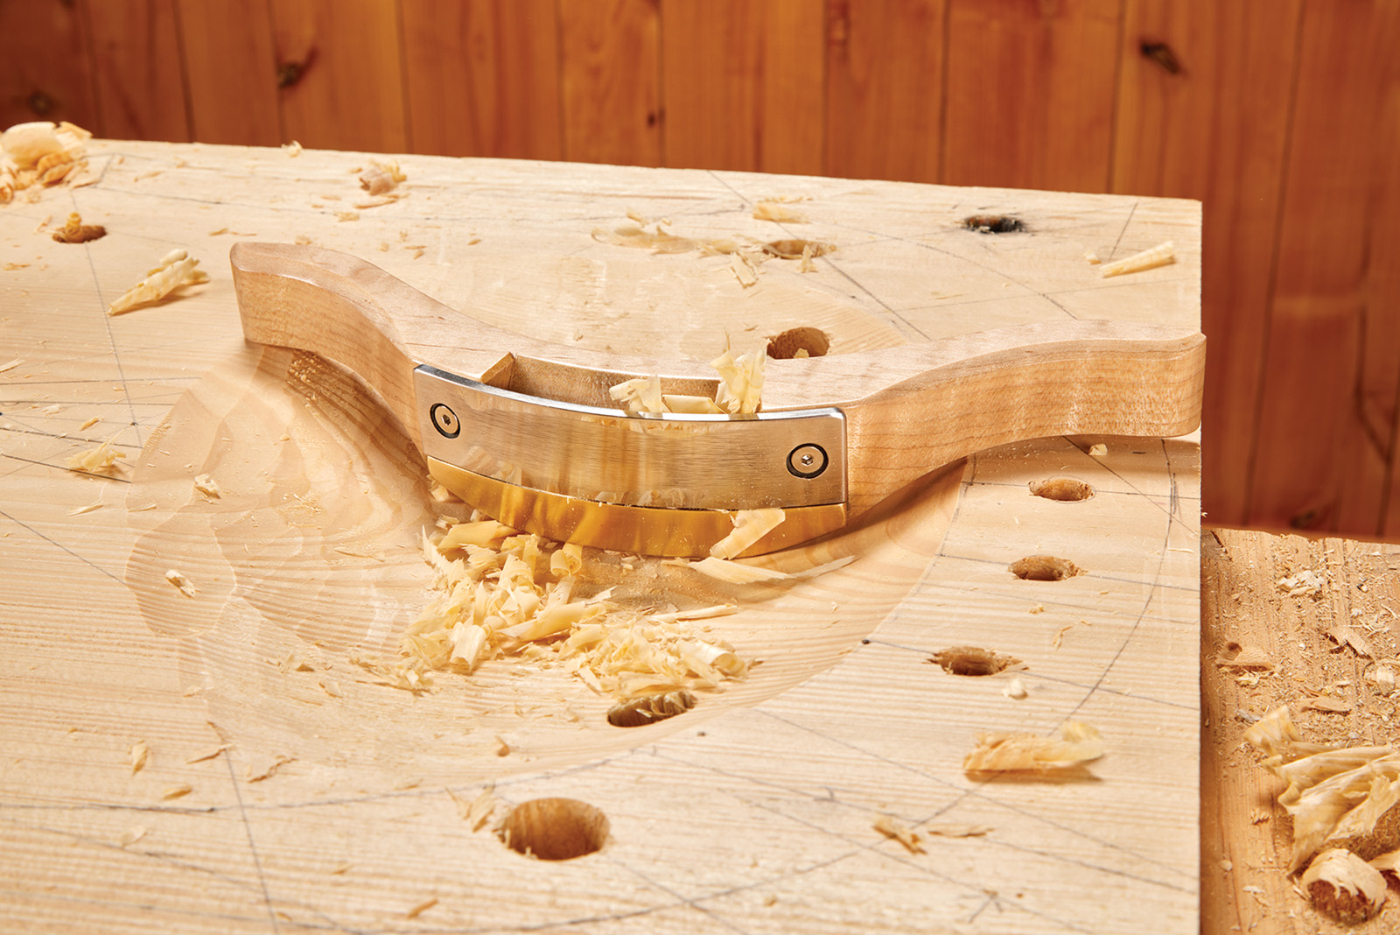 IWF auction supports developing the next generation of woodworkers